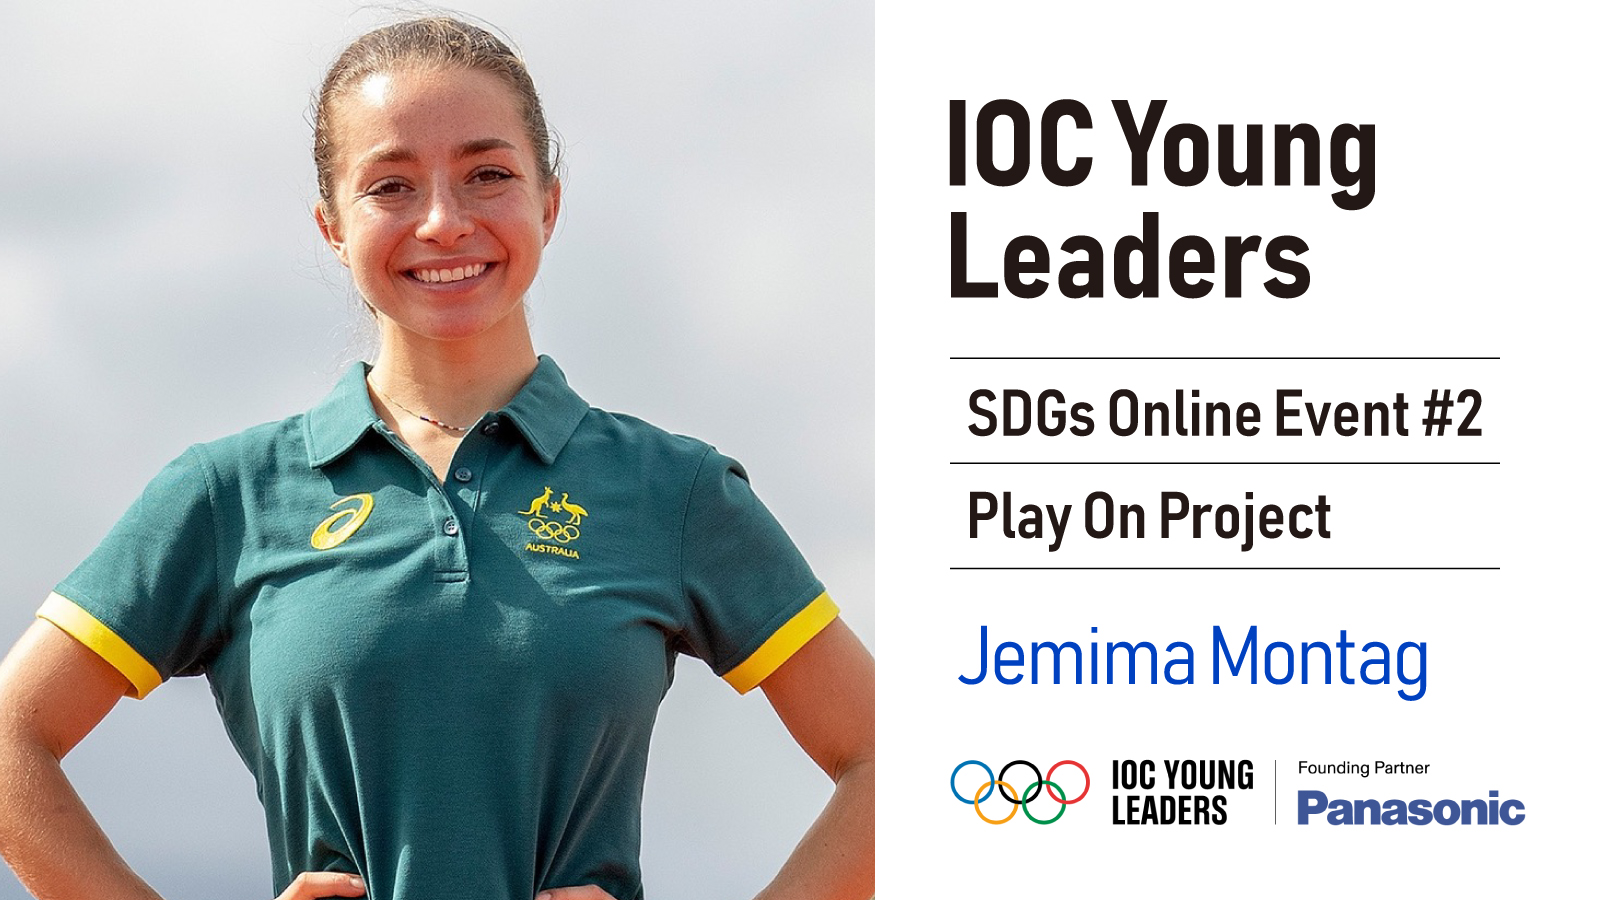 IOC Young Leader Jemima Montag Working to Boost Girls’ and Women’s Participation in Sport